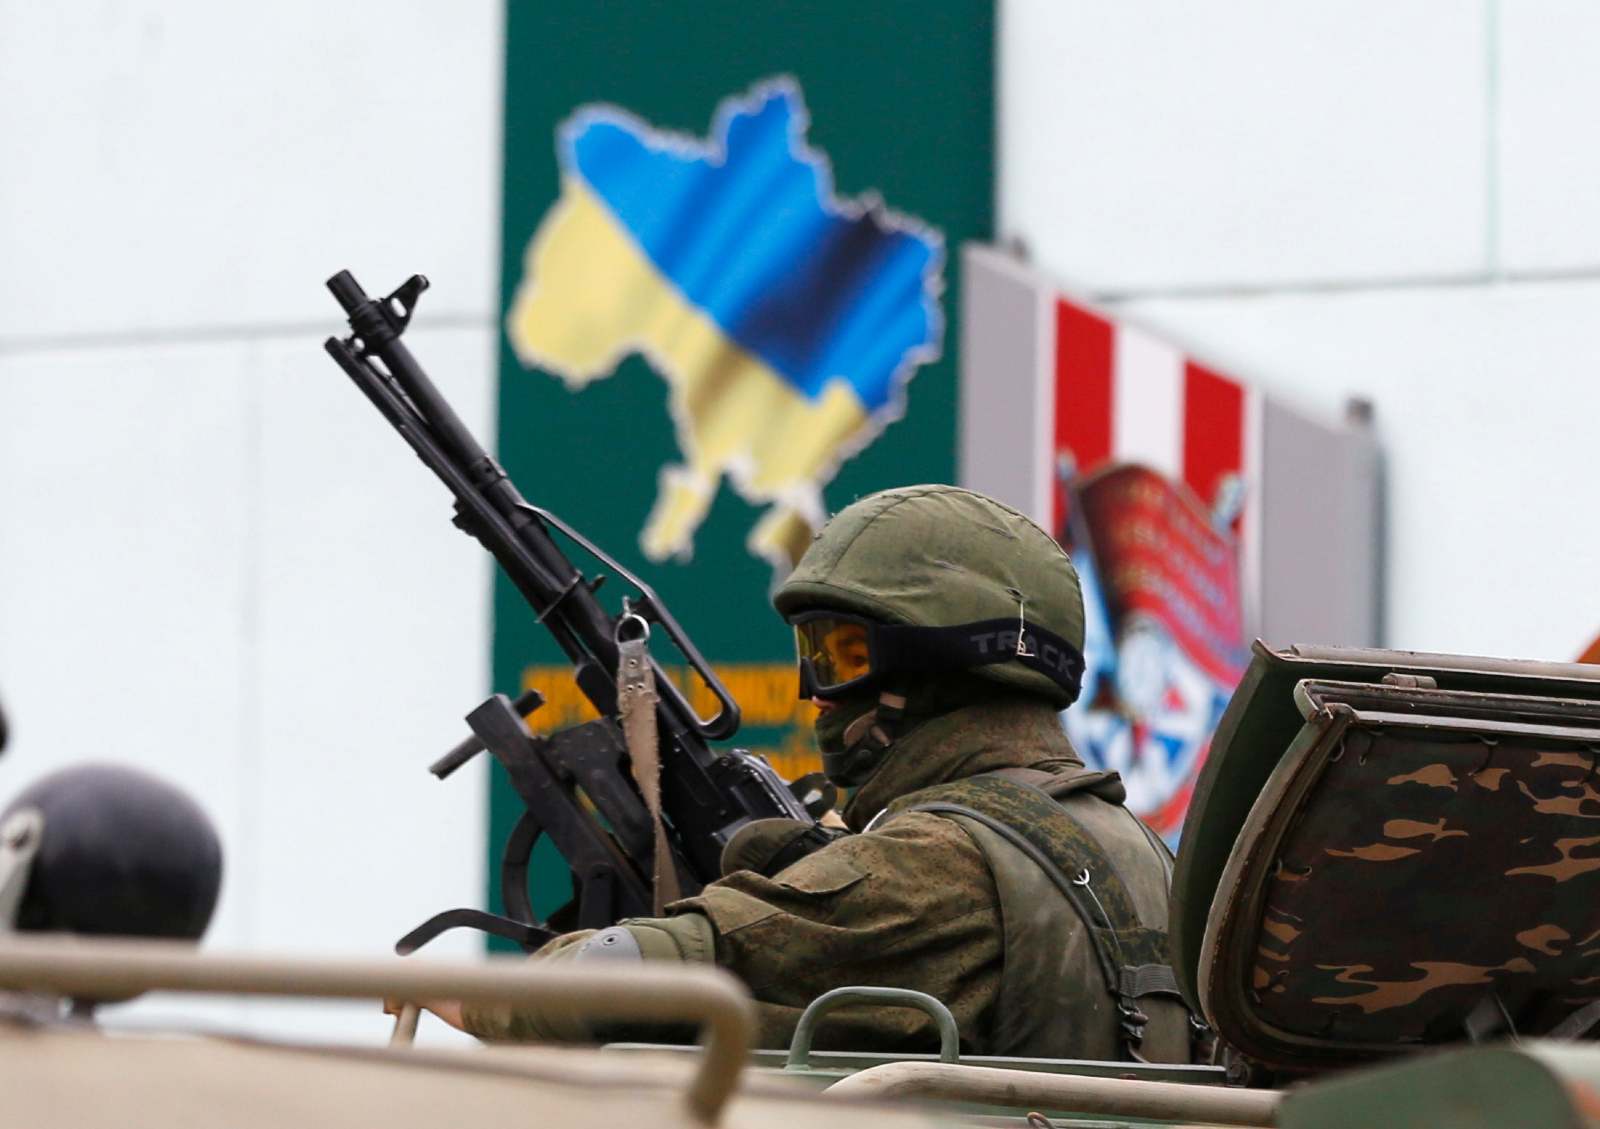 An armed serviceman looks out from a Russian army vehicle outside a Ukrainian border guard post in the Crimean town of Balaclava March 1, 2014. Ukraine accused Russia on Saturday of sending thousands of extra troops to Crimea and placed its military in the area on high alert as the Black Sea peninsula appeared to slip beyond Kiev's control.